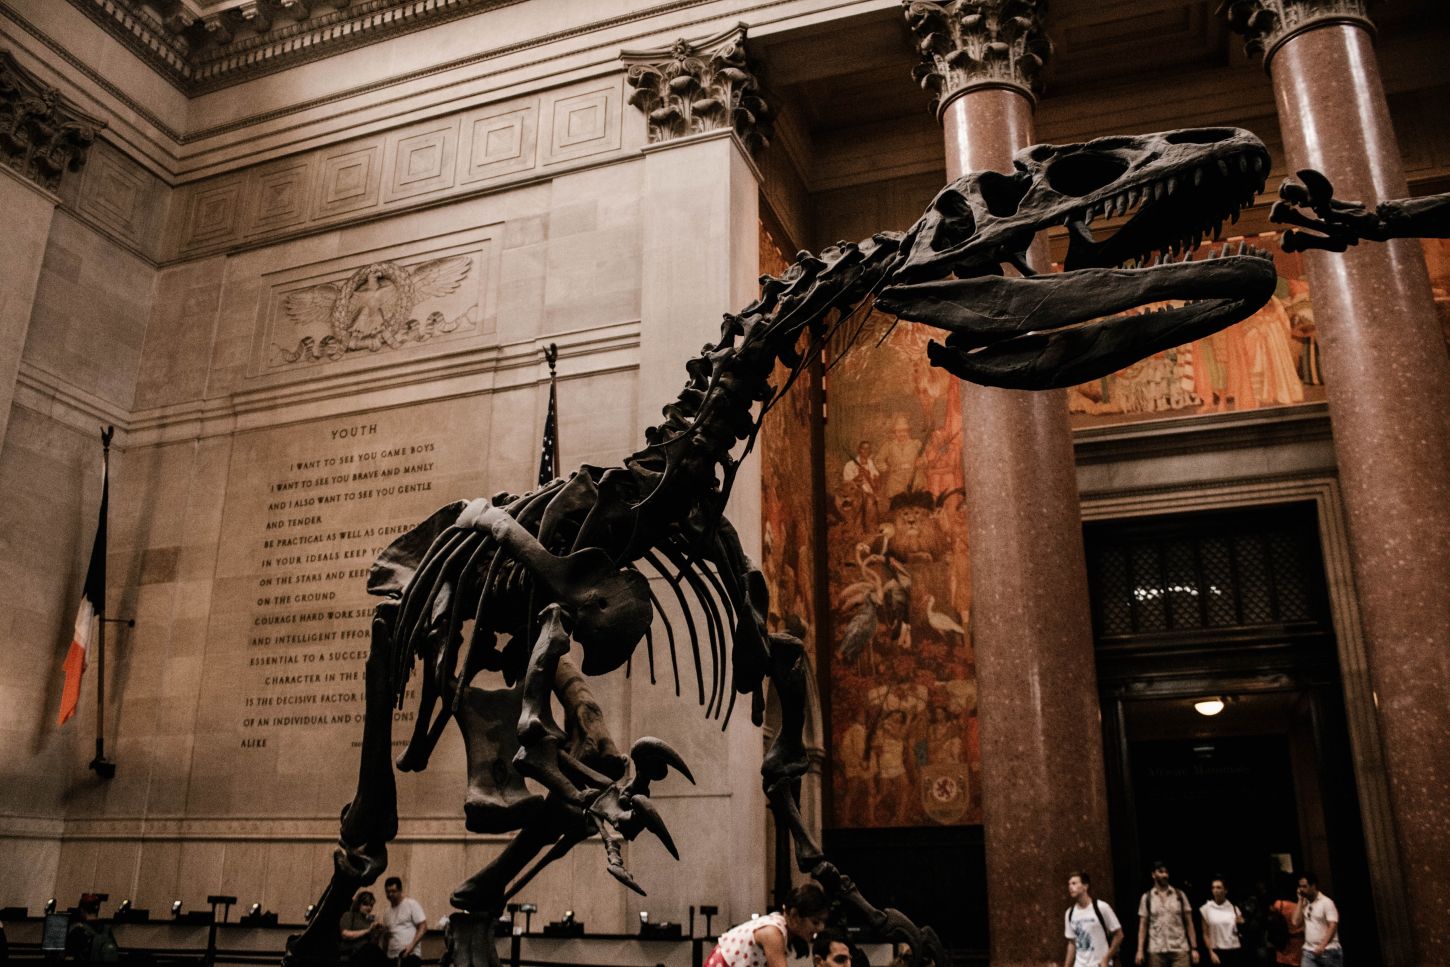 American Museum of Natural History, New York